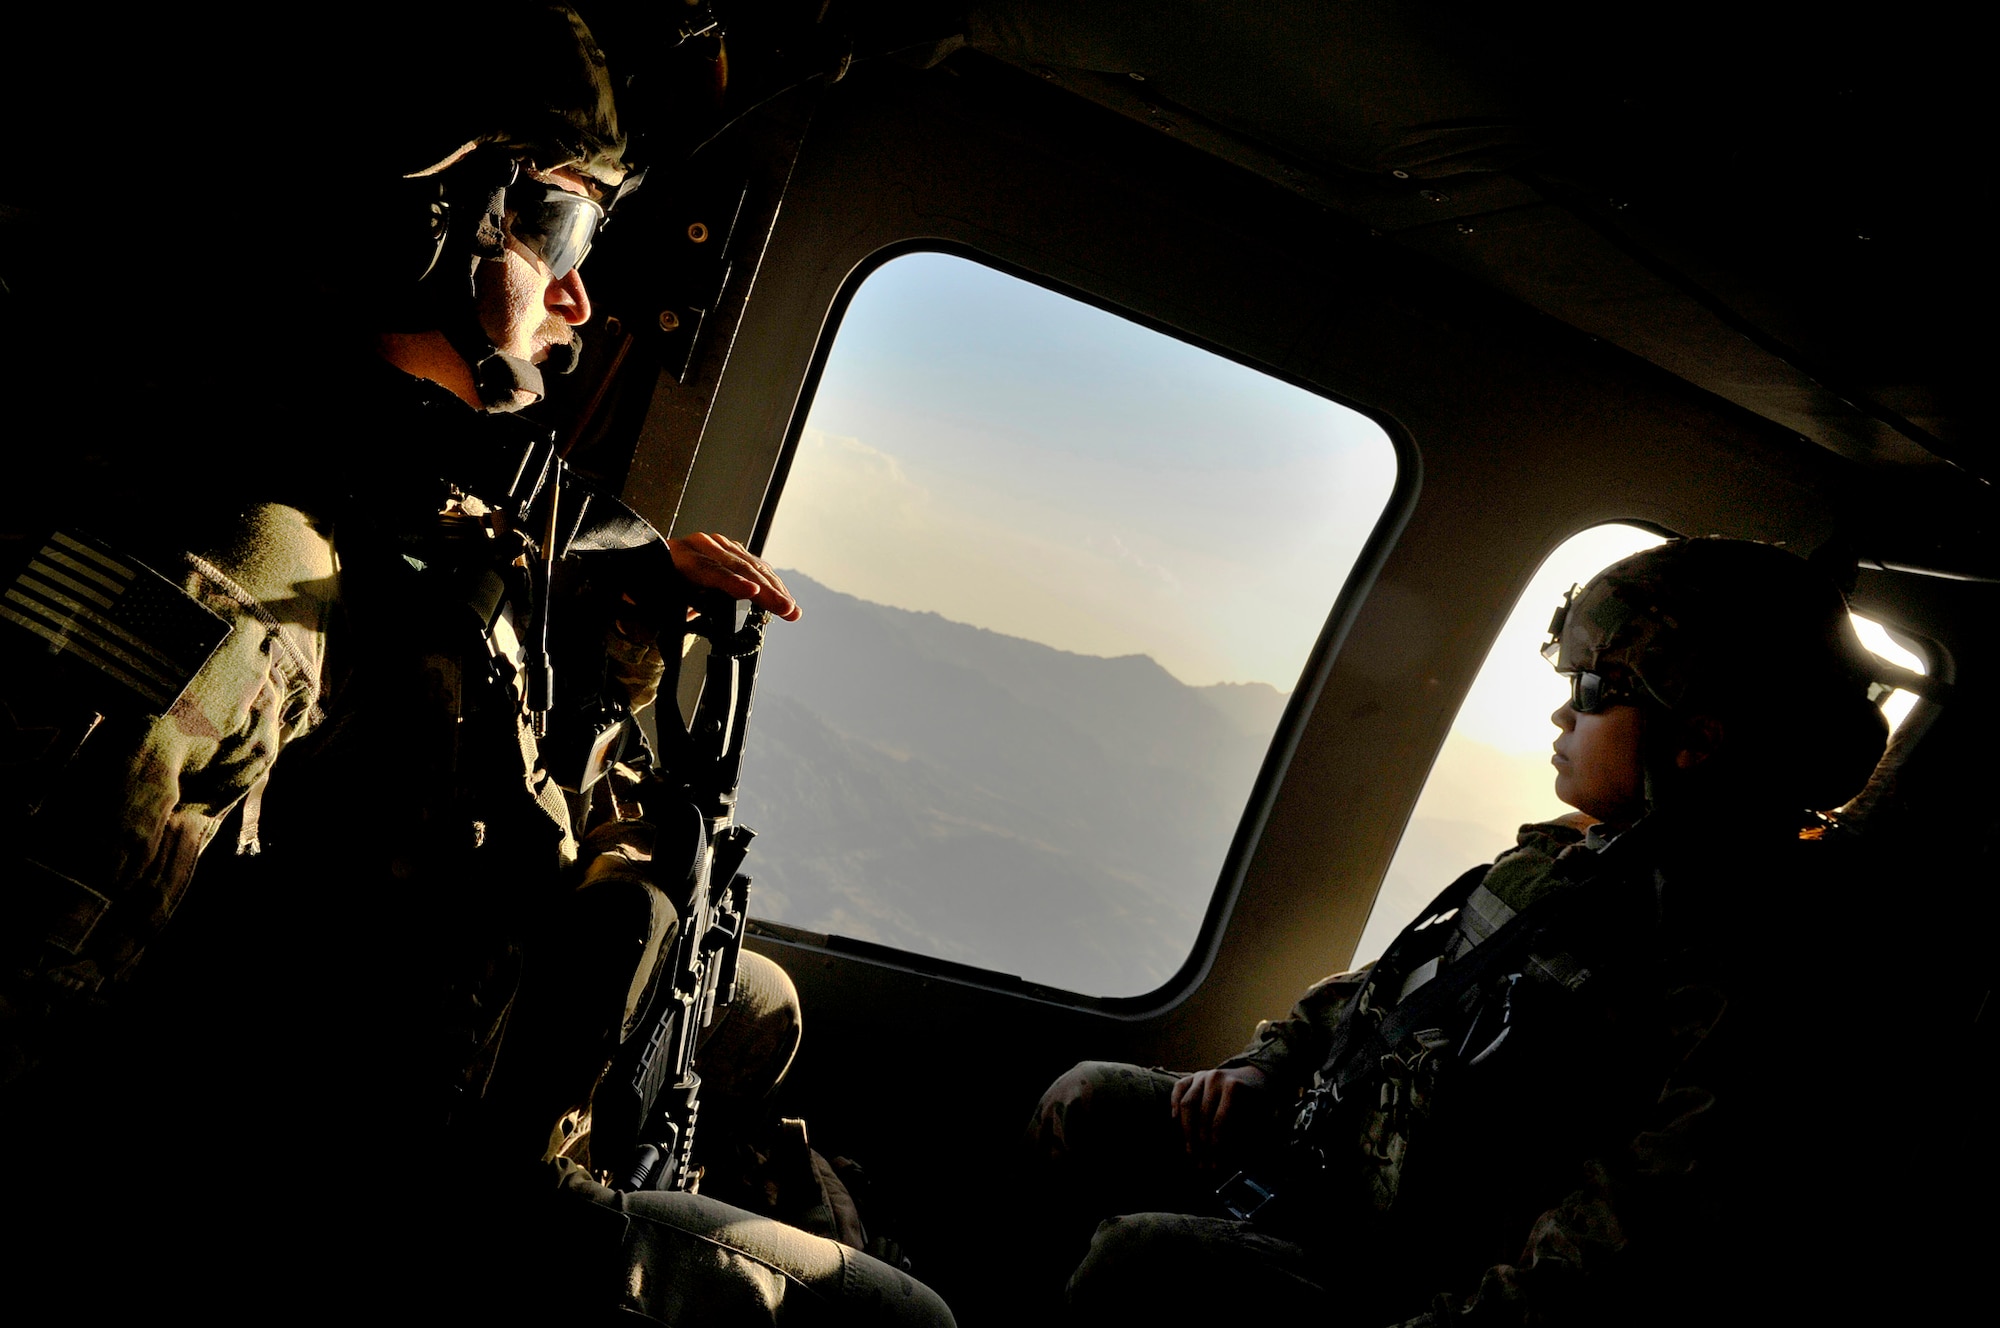 U.S. Air Force Staff Sgt. Richard DeBolt, Joint Terminal Attack Controller, 817th Expeditionary Air Support Operations Squadron,  scans the below terrain during a short helicopter flight to a forward operating base in the Kunar Province of Afghanistan, Oct. 4, 2012. DeBolt is deployed from Ft. Carson, CO., and is tasked to support ground operations in Regional Command-East, near the Pakistan border. DeBolt and fellow JTAC members provide ground forces with air superiority by controlling overhead aircraft that are able to deliver multiple weapons systems, as well as intelligence, surveillance, and reconnaissance capabilities. JTACs and Radio Operators, Maintainers, and Drivers train and operate alongside their Army counterparts in order to prepare them for kinetic situations while outside the wire. (U.S. Air Force photo/Staff Sgt. Clay Lancaster)